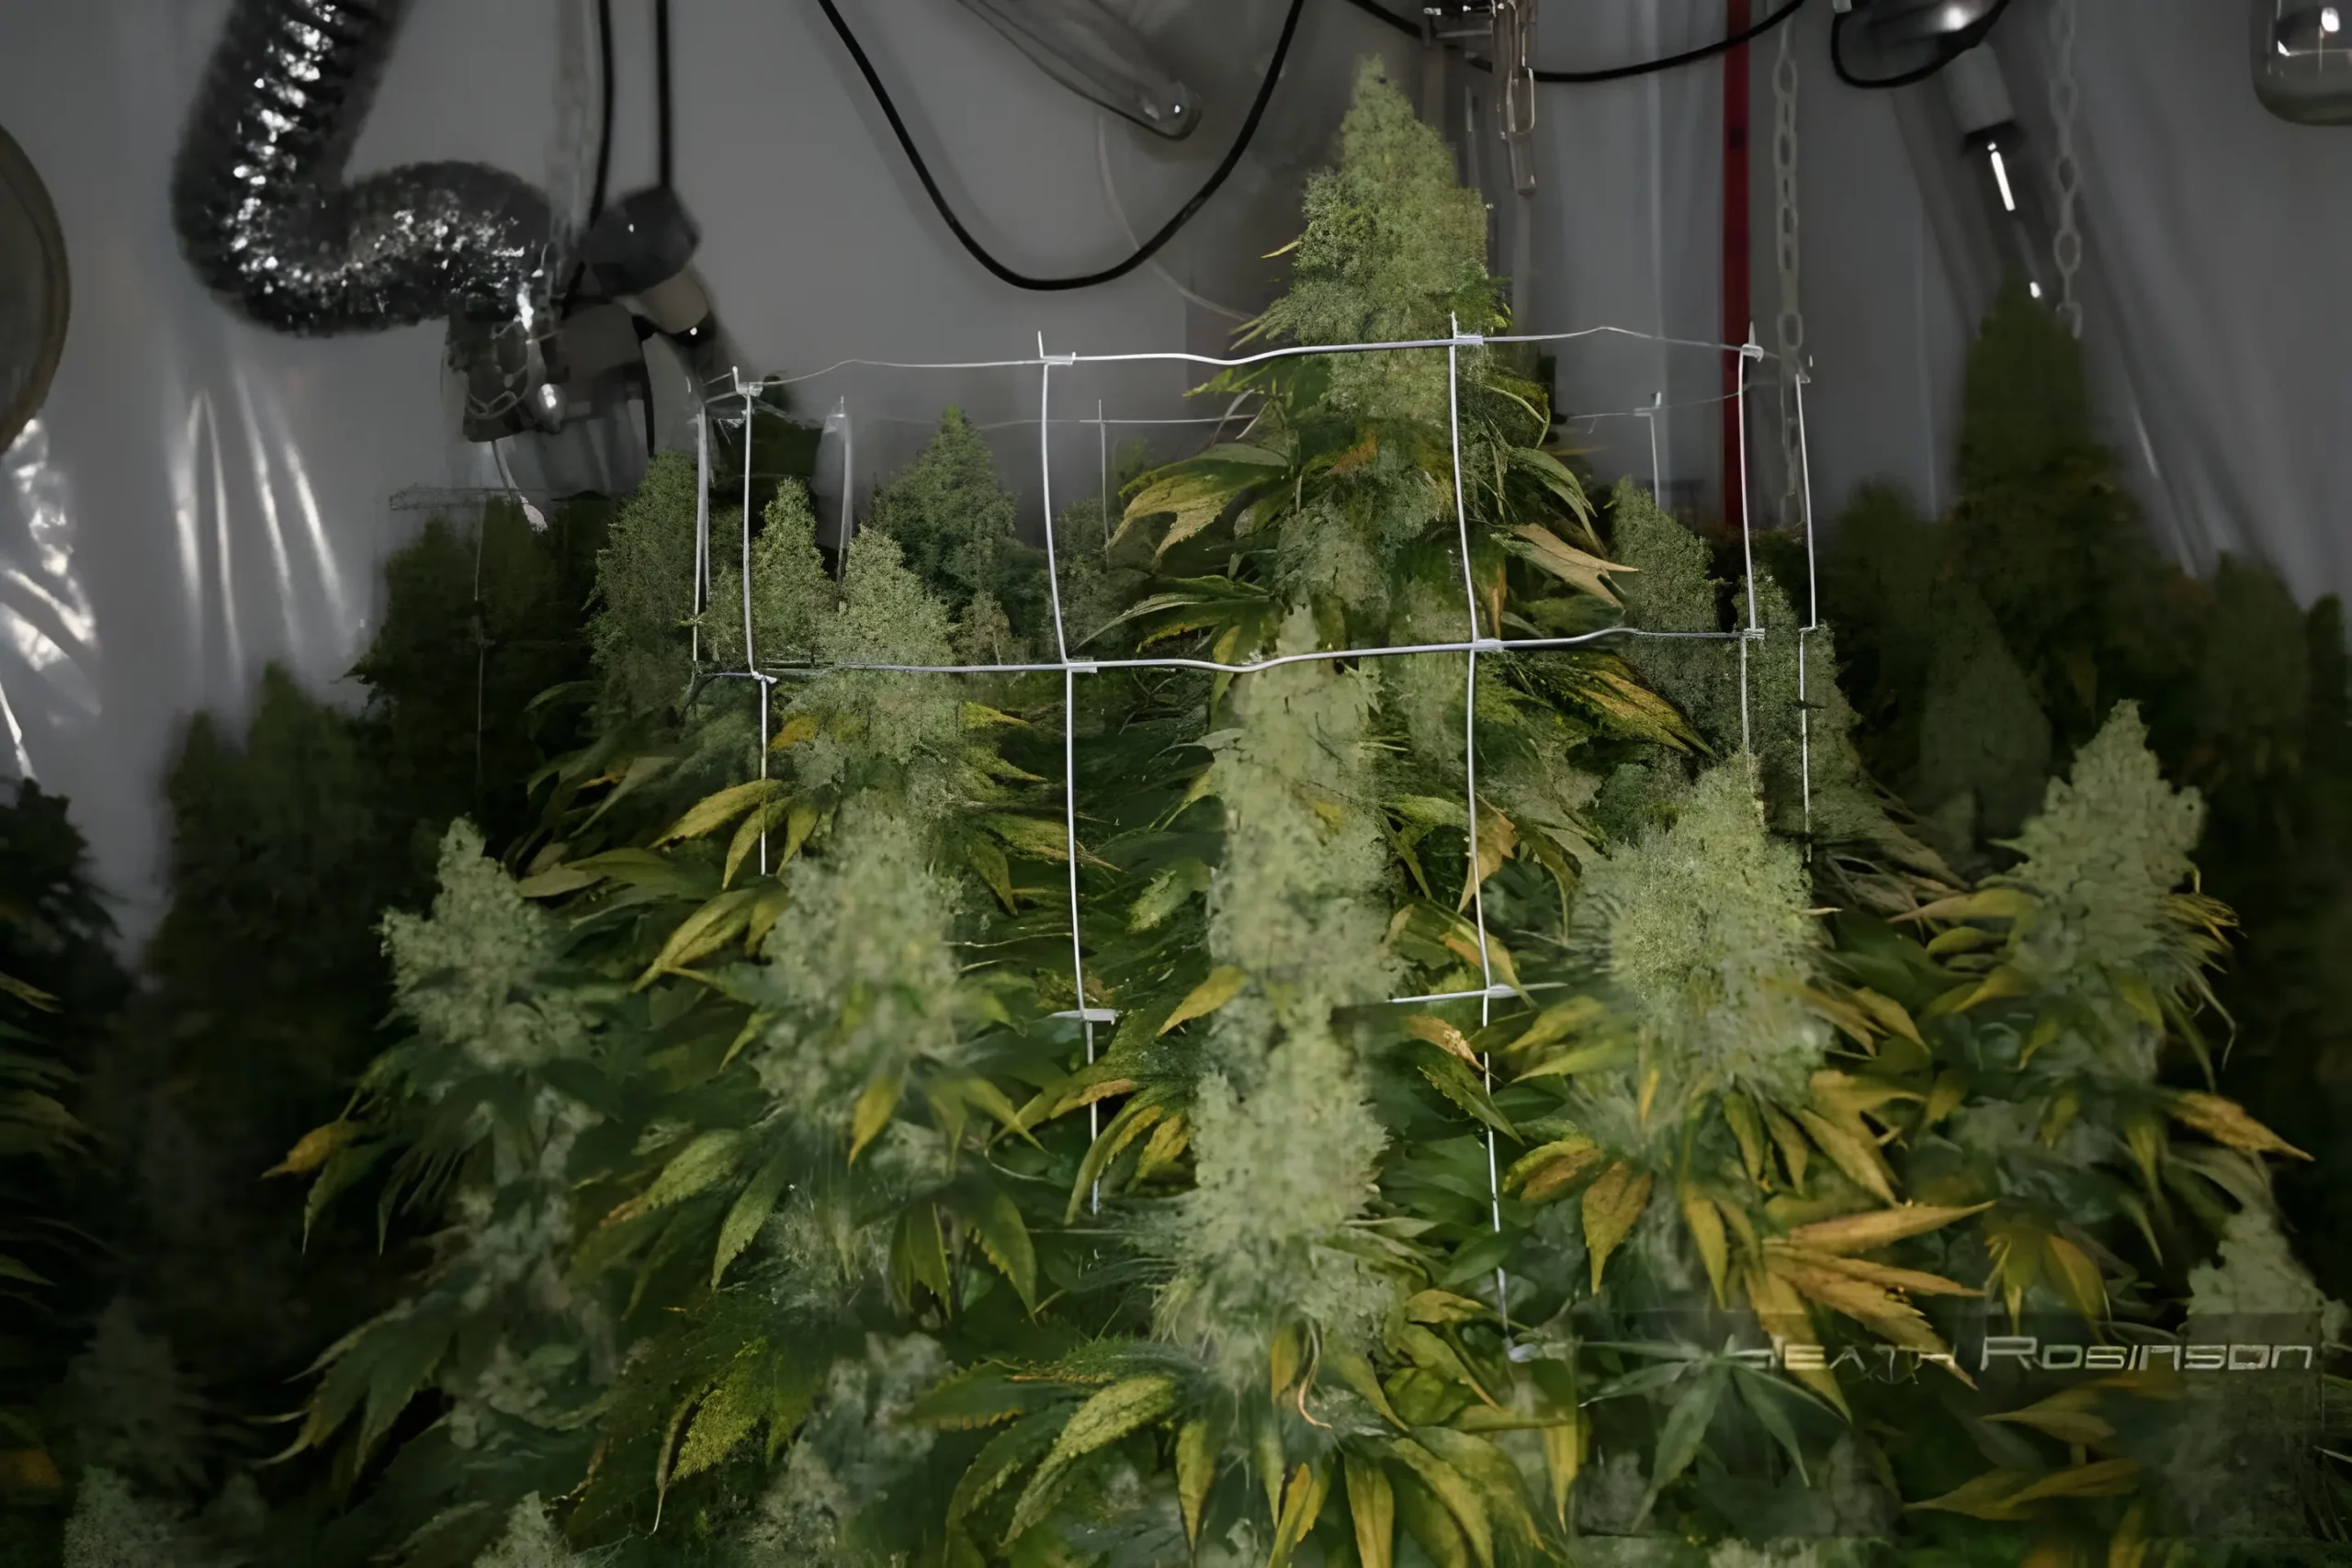 Lush cannabis plants with dense foliage supported by a white trellis in an indoor grow tent. Heath Robinson grow